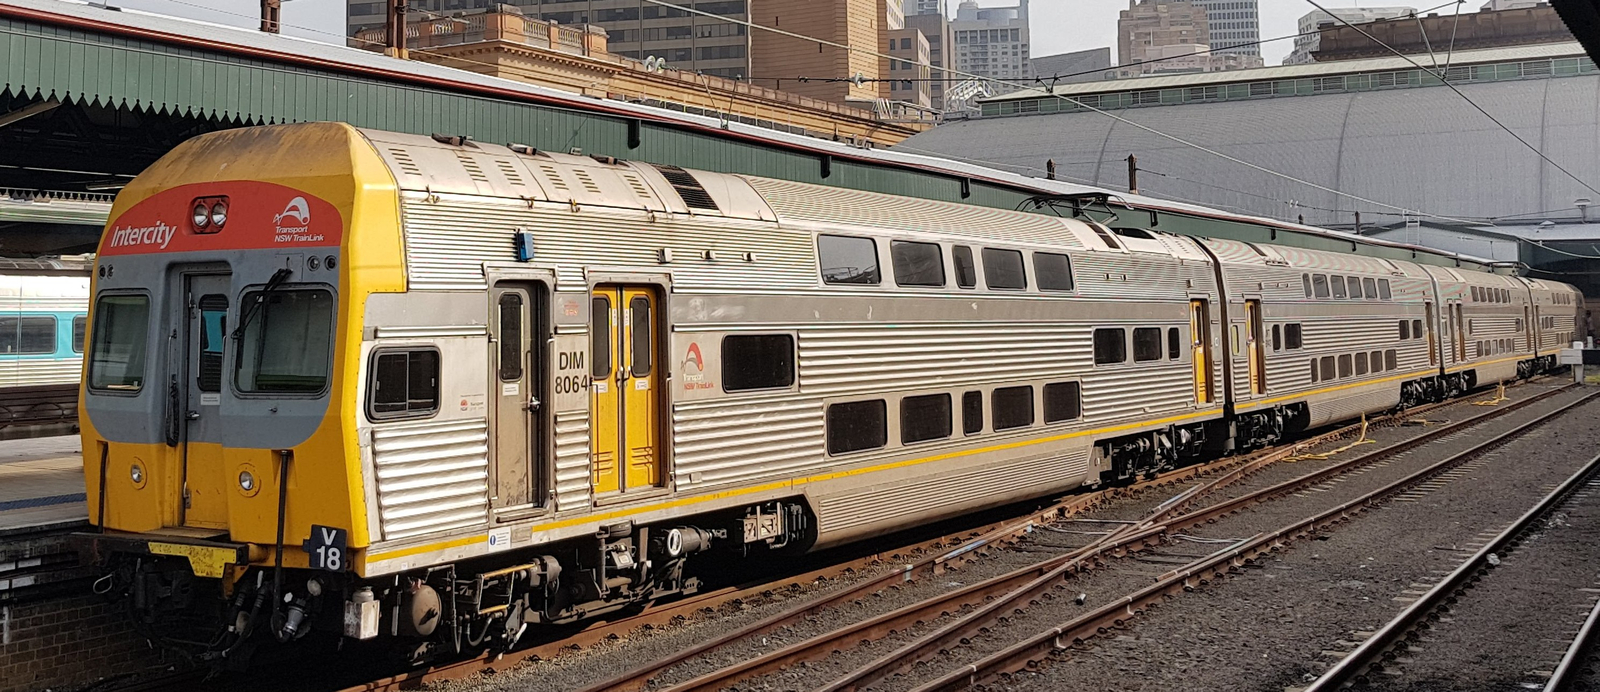 Train at Sydney Central Station in March 2019